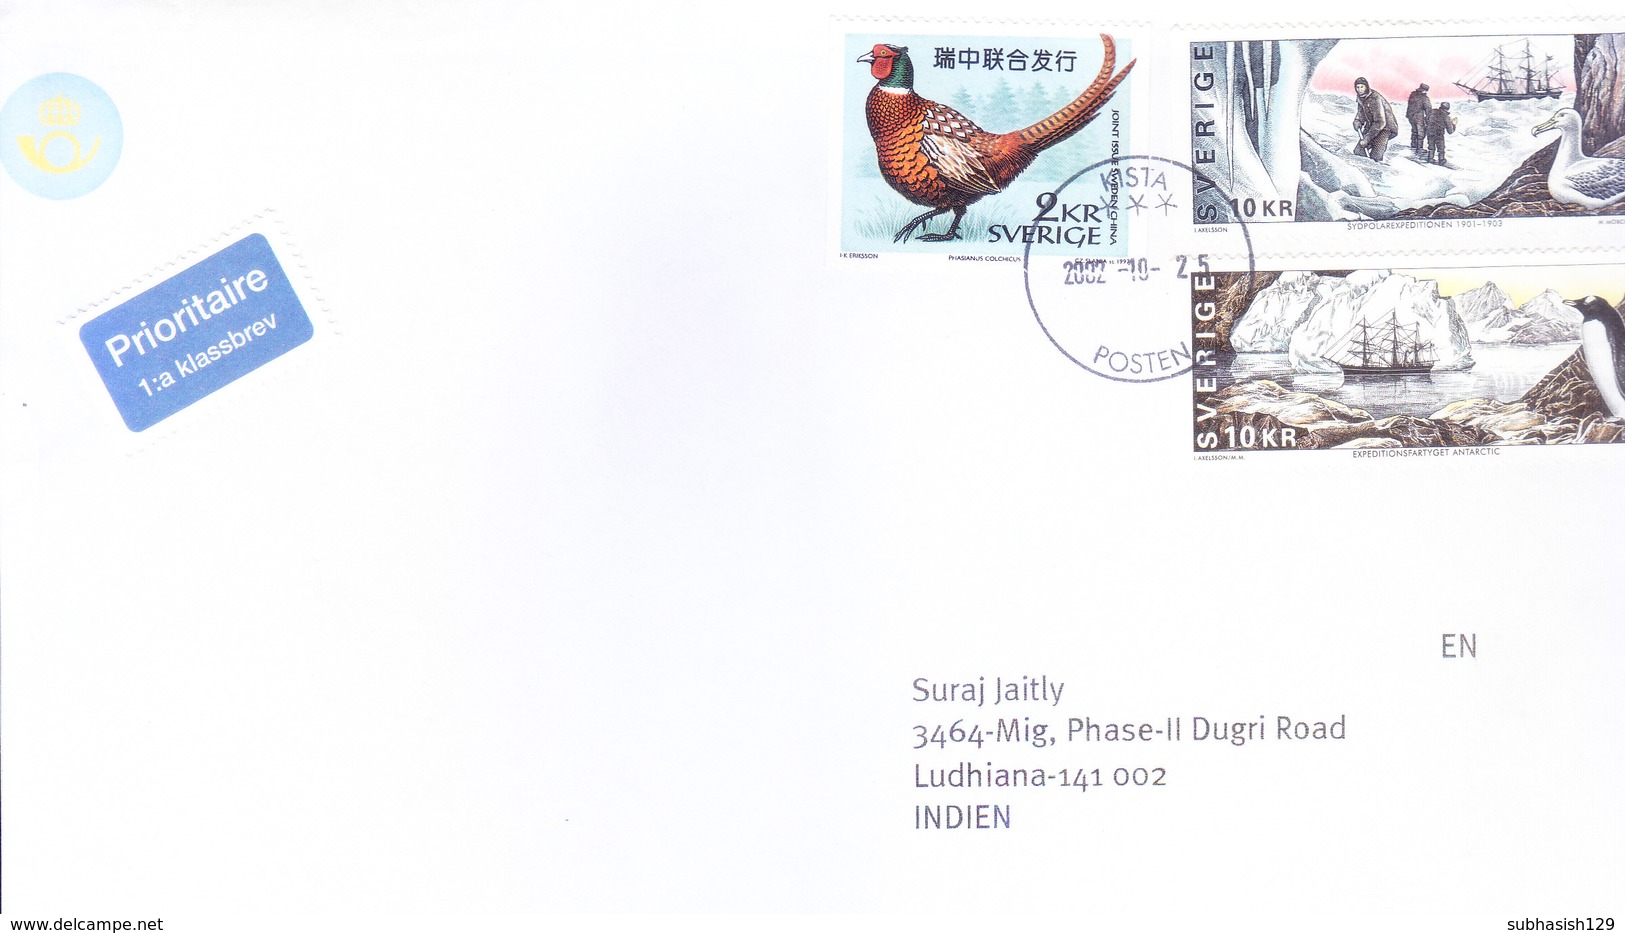 SWEDEN 2002 COMMERCIAL COVER POSTED FROM KISTA FOR INDIA - ANTARCTIC EXPEDITION STAMP, SWEDEN CHINA JOINT ISSUE STAMP - Covers & Documents